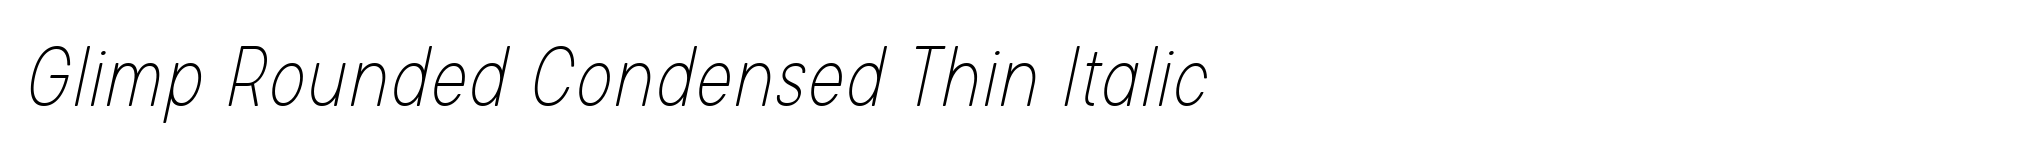 Glimp Rounded Condensed Thin Italic image